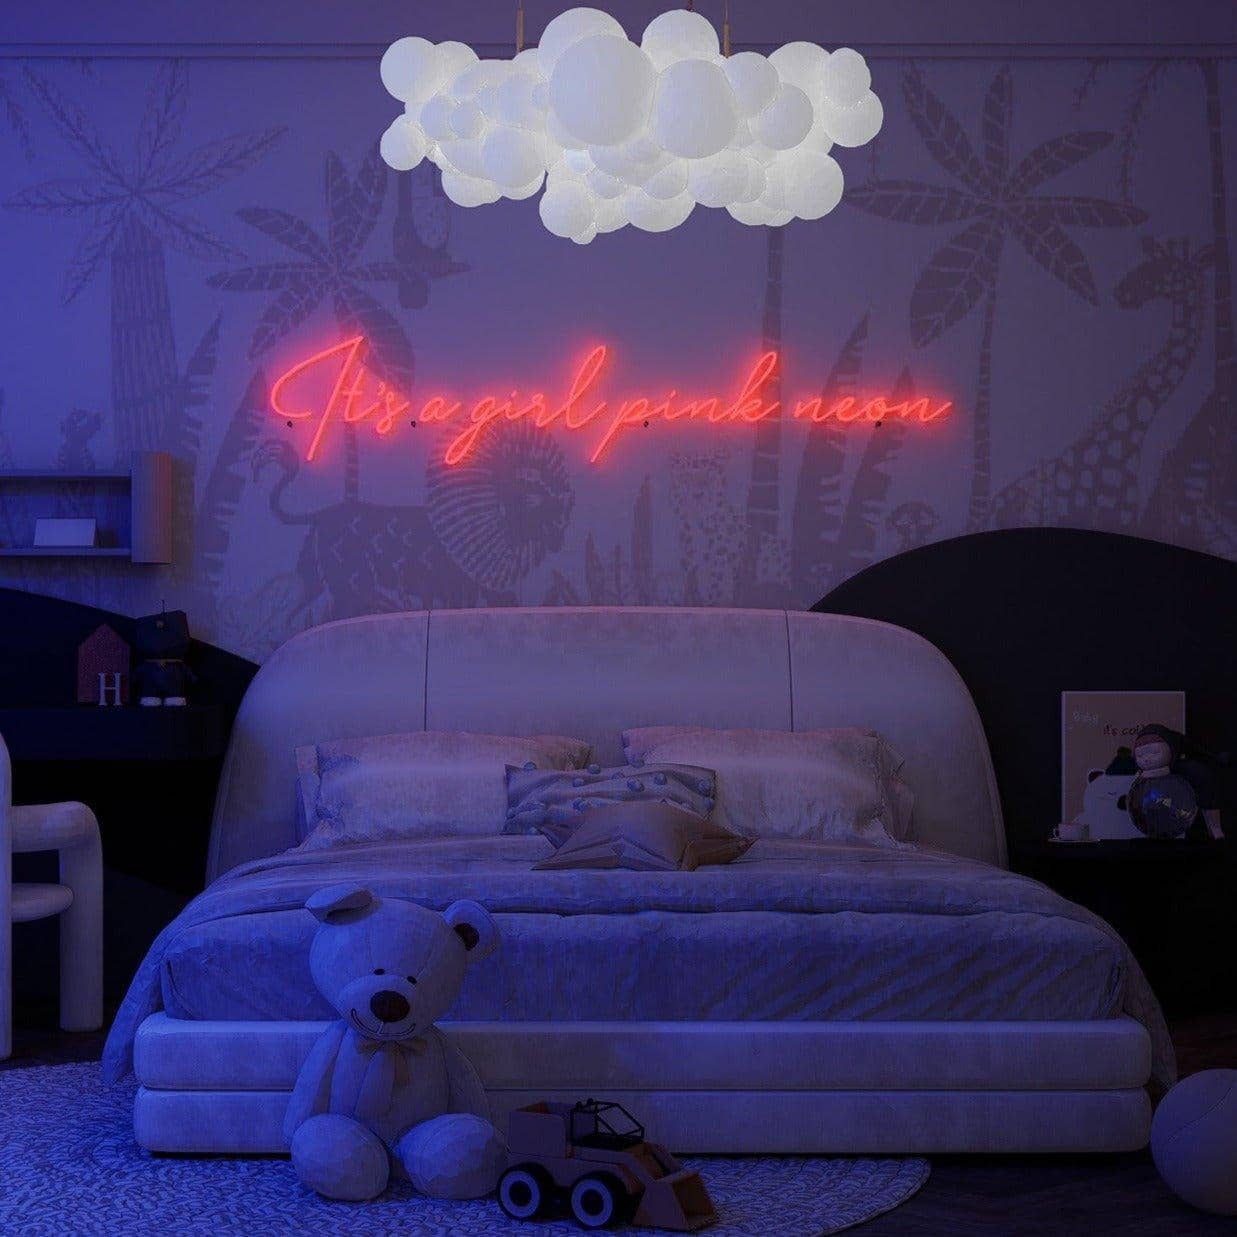 red-neon-lights-lit-up-at-night-and-hung-on-the-wall-for-display-it's-a-girl-pink-neon